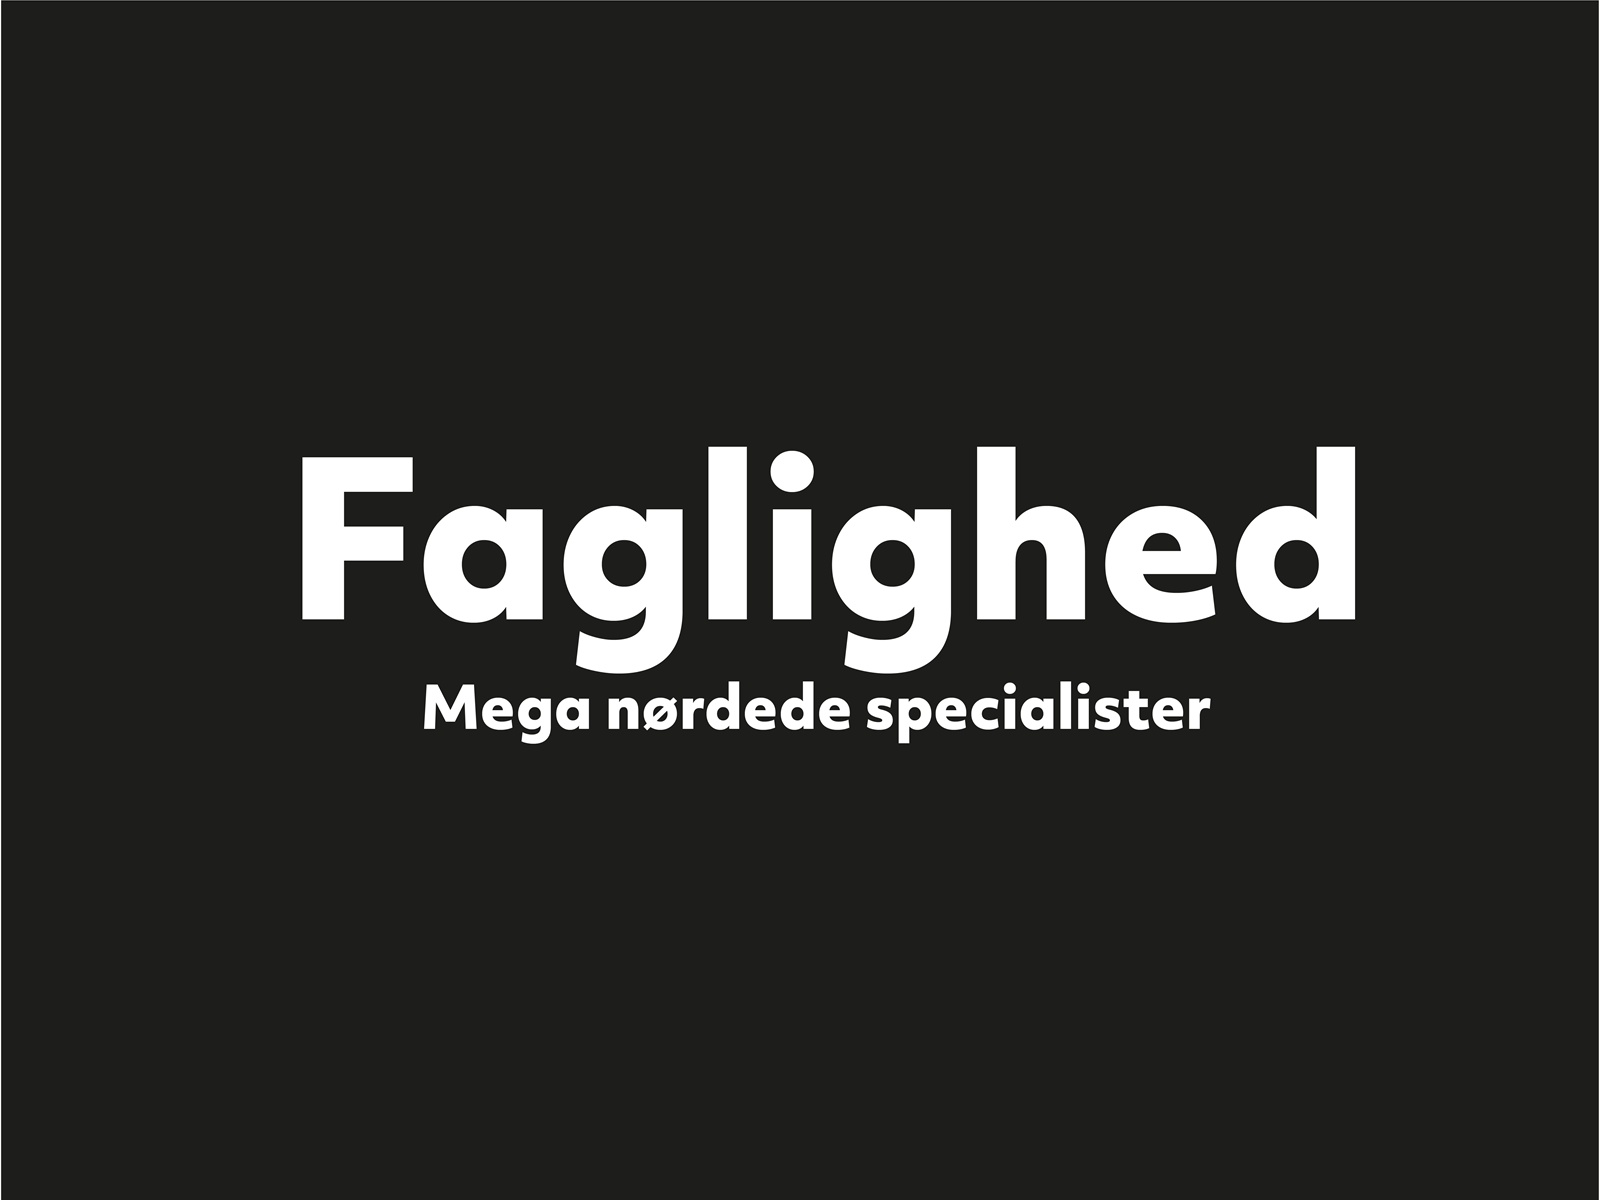 Faglighed